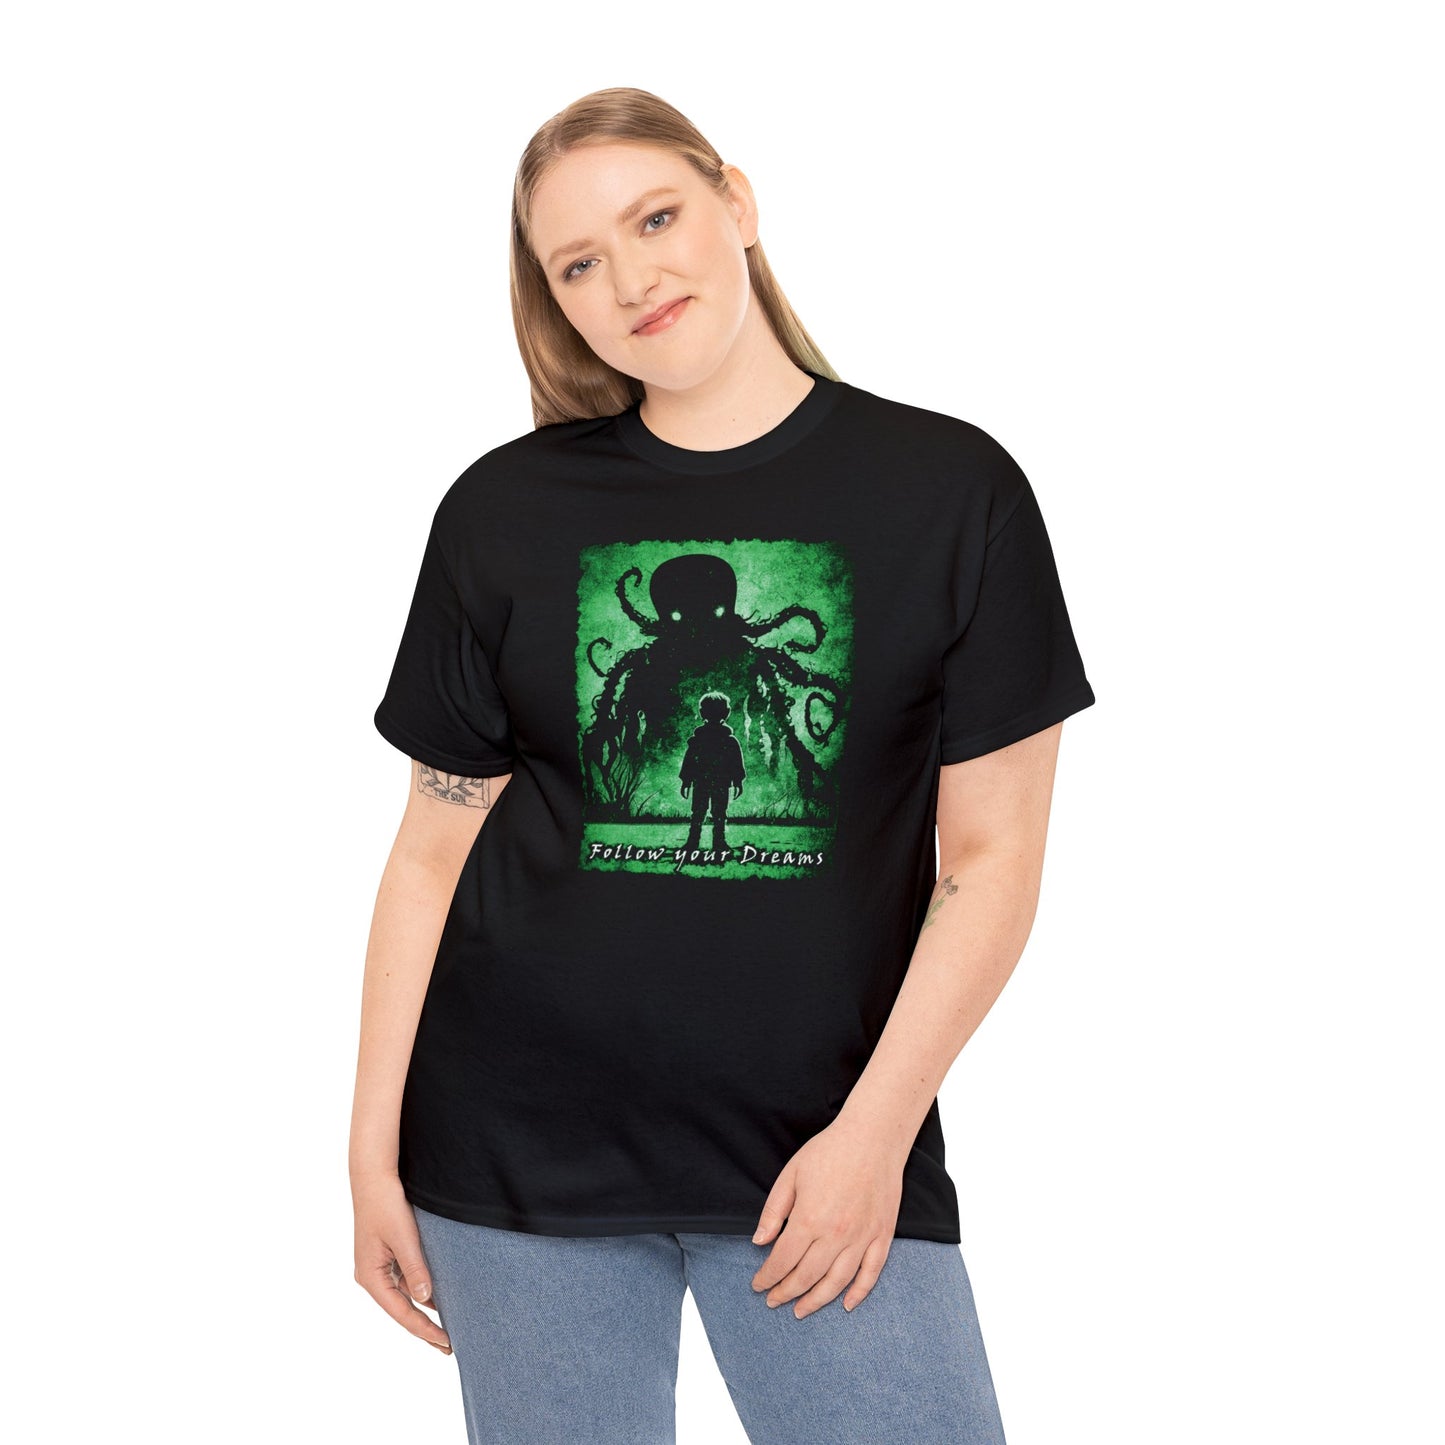 Unisex T-shirt Follow your Dreams in Green - Frogos Design